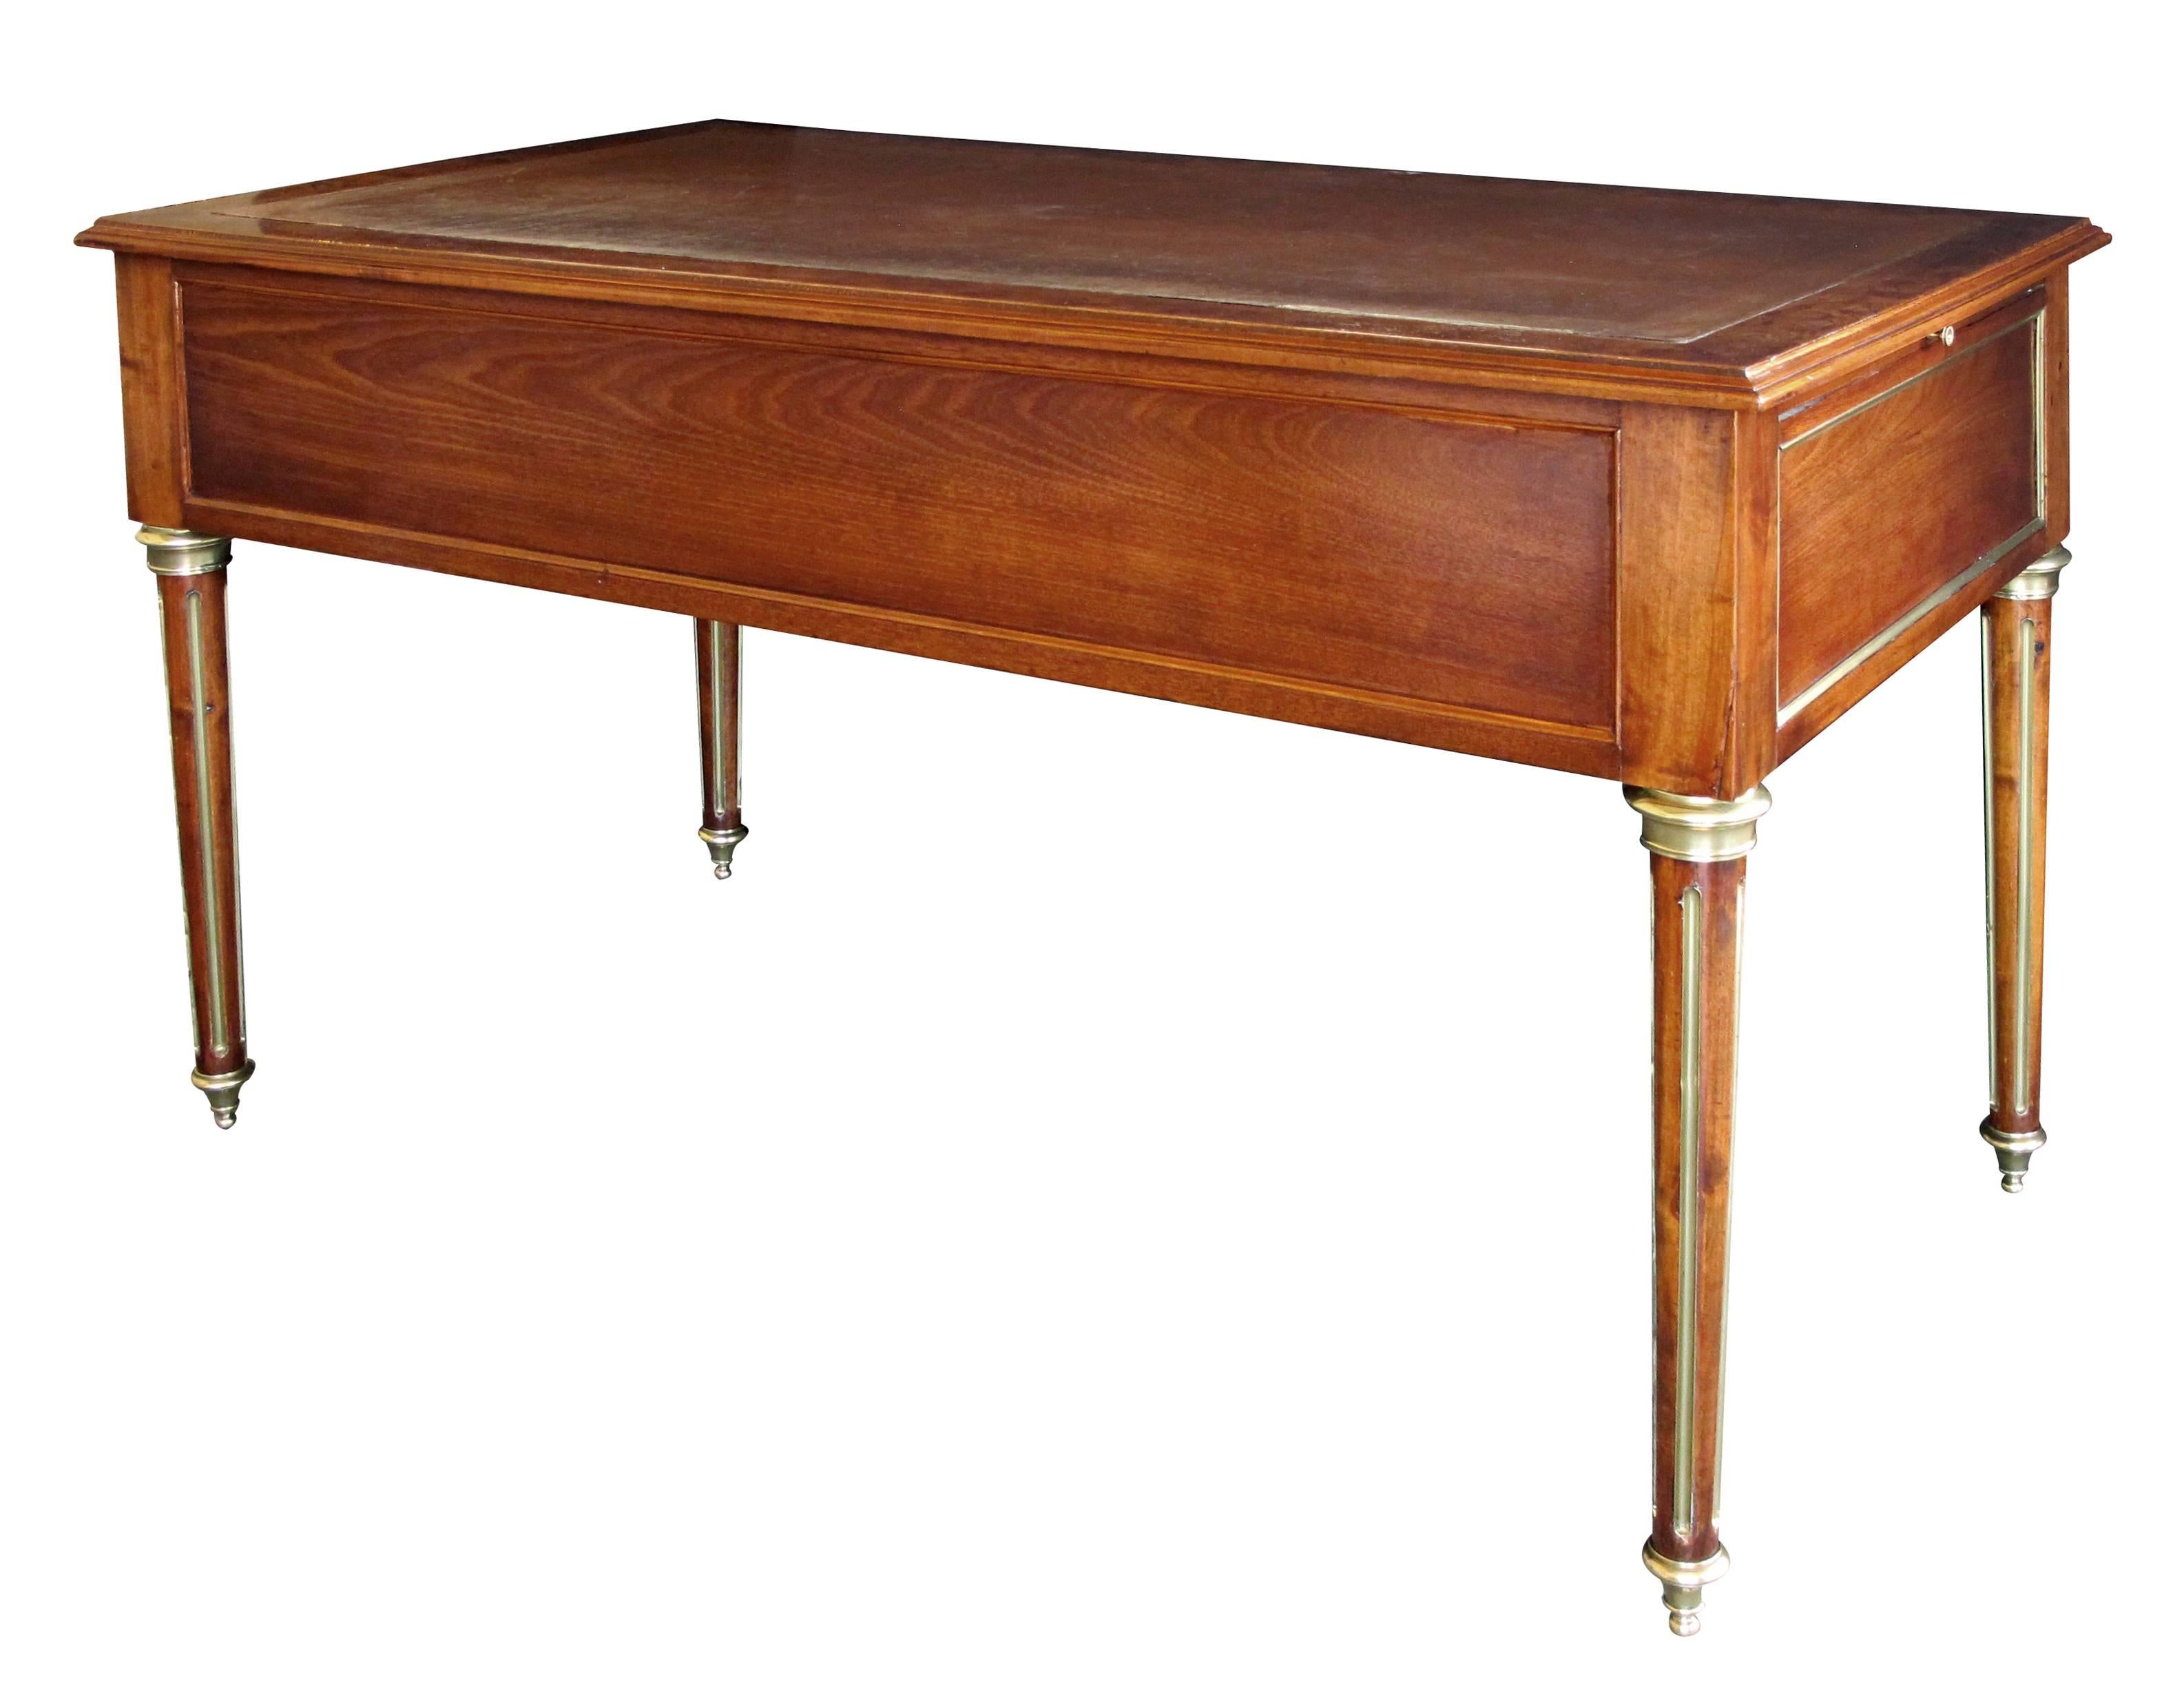 Well-Crafted French Louis XVI Style Mahogany Four-Drawer Writing Desk 1